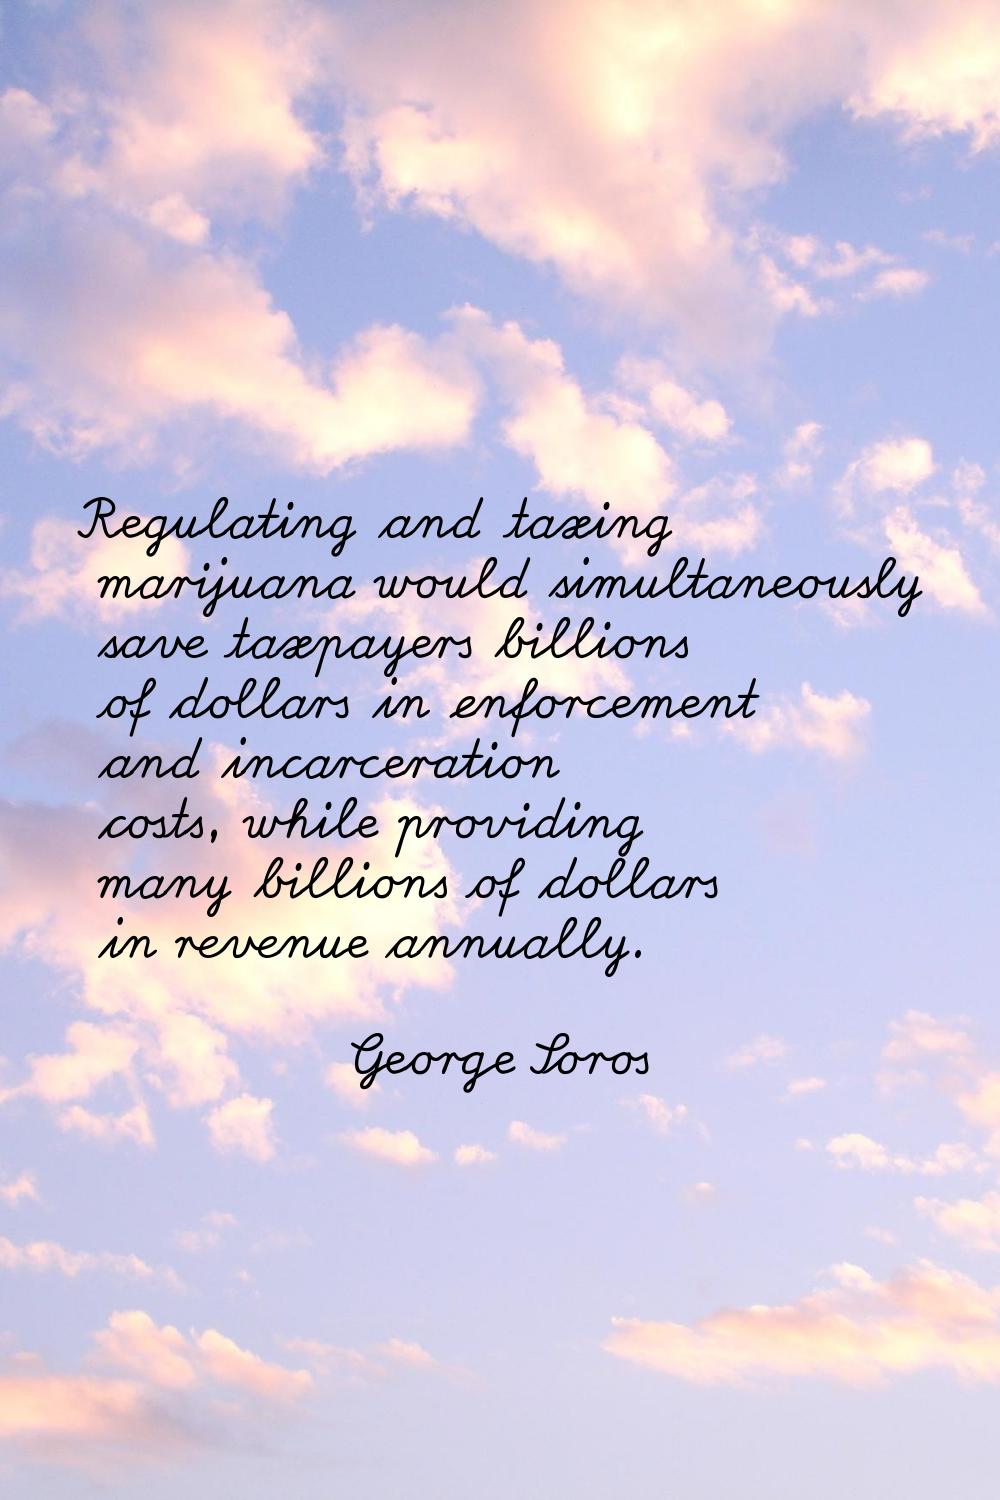 Regulating and taxing marijuana would simultaneously save taxpayers billions of dollars in enforcem